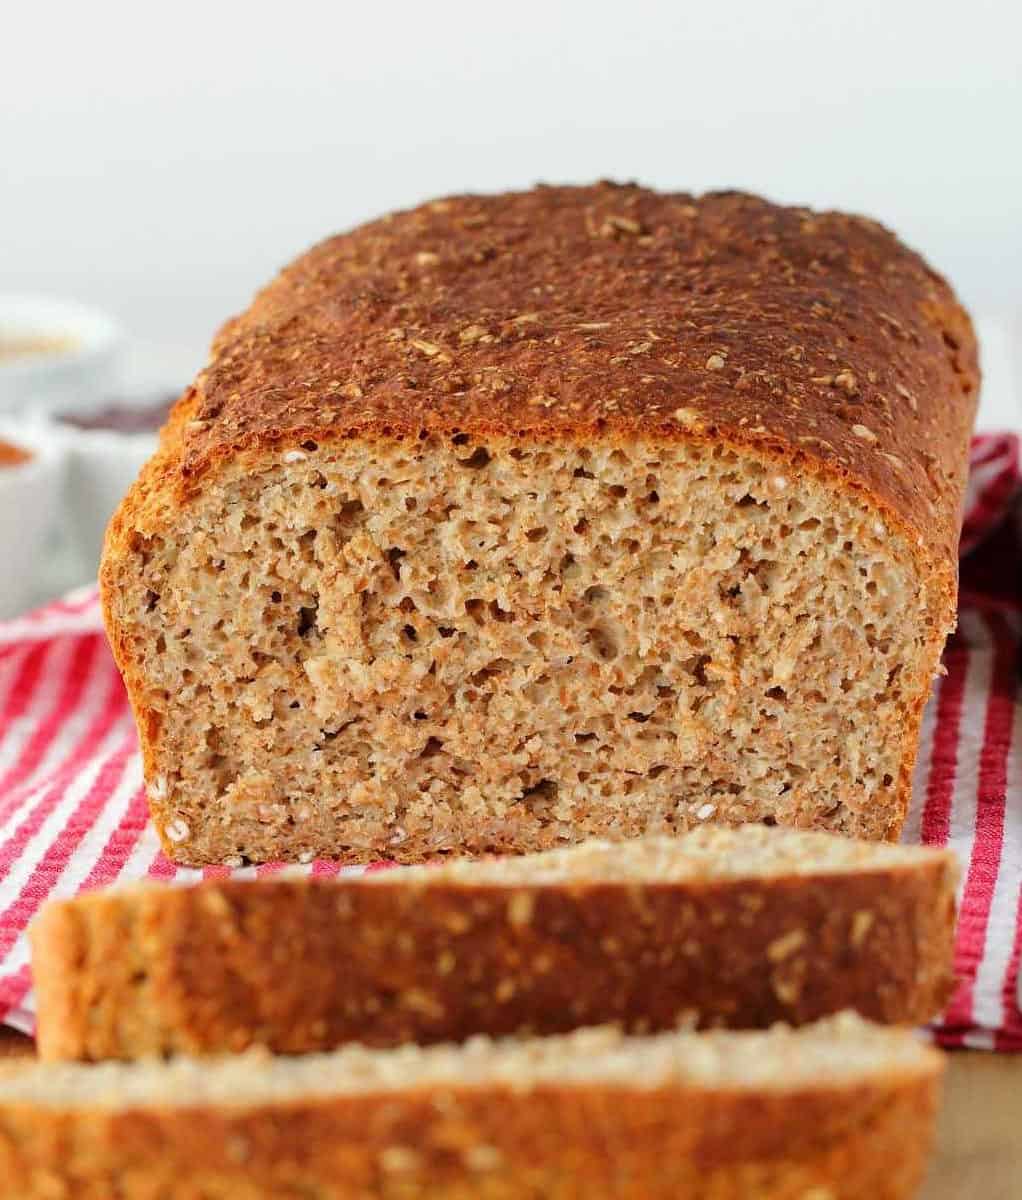  If you're looking for a healthy alternative to store-bought bread, look no further.